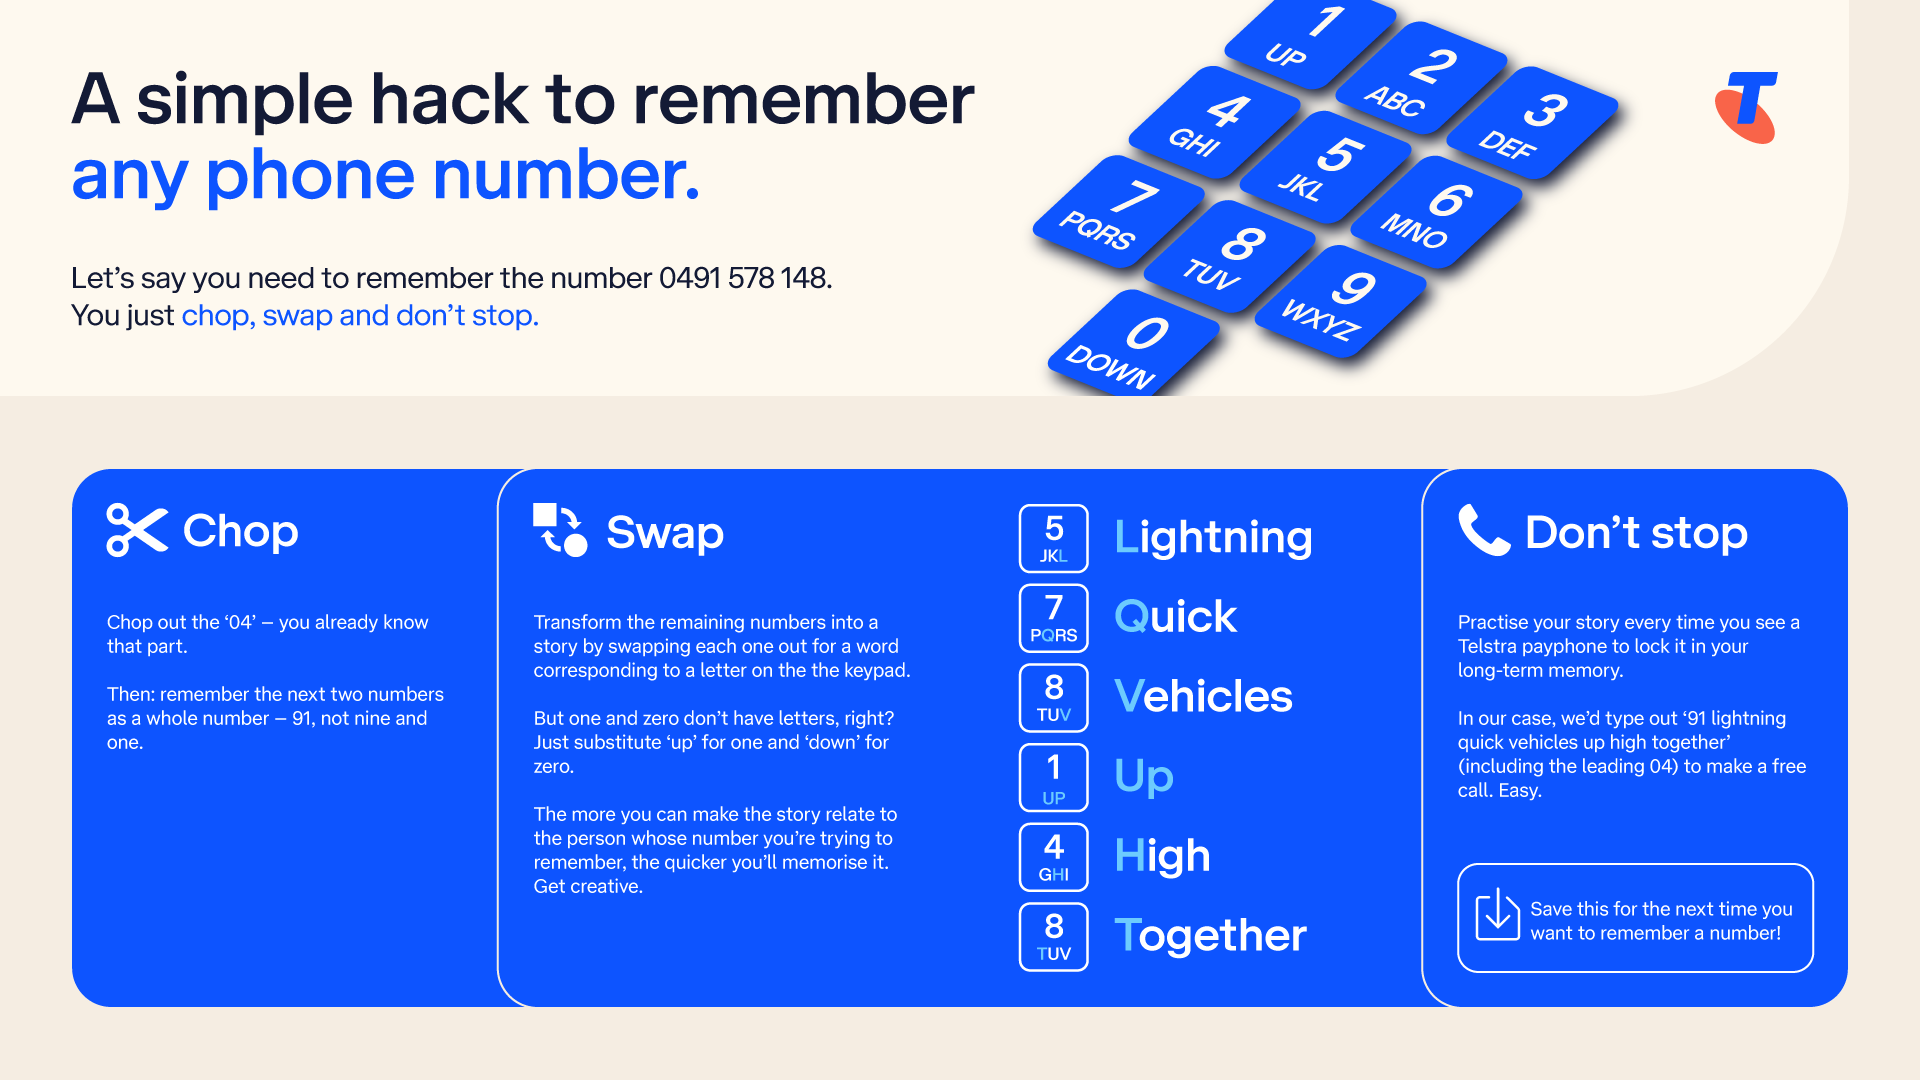 An infographic on how to remember phone numbers better. This simple technique uses language, emotion and visualisation to link numbers to words, making them easier to remember. Say you want to remember the number: 0491 578 148. CHOP: Drop the ‘04’, you already know this. Then, remember the next two numbers as a whole – e.g. 91, not nine and one. SWAP: Break the rest of the number up into two three-number chunks and transform them into a story. Assign each number a word using a corresponding letter on the keypad. But hold up. The 1 and 0 keys don’t have letters, right? In their case, just think about their location on the keypad and use ‘up’ (1) and ‘down’ (zero). Let’s try it out with the number 0491 578 148. We’ll make it even easier by integrating the first two numbers into the story. Our chunks are 578 and 148. Which could turn into: 91 lightning (5) quick (7) vehicles (8) / up (1) high (4) together (8). All you’ve got to do is type that out that little tale next time you want to get in touch with someone important. DON’T STOP: Repeating the technique every time you see a free Telstra payphone will lock it in even further. This is called ‘spaced repetition’ and is the best way to cement something into your long-term memory.